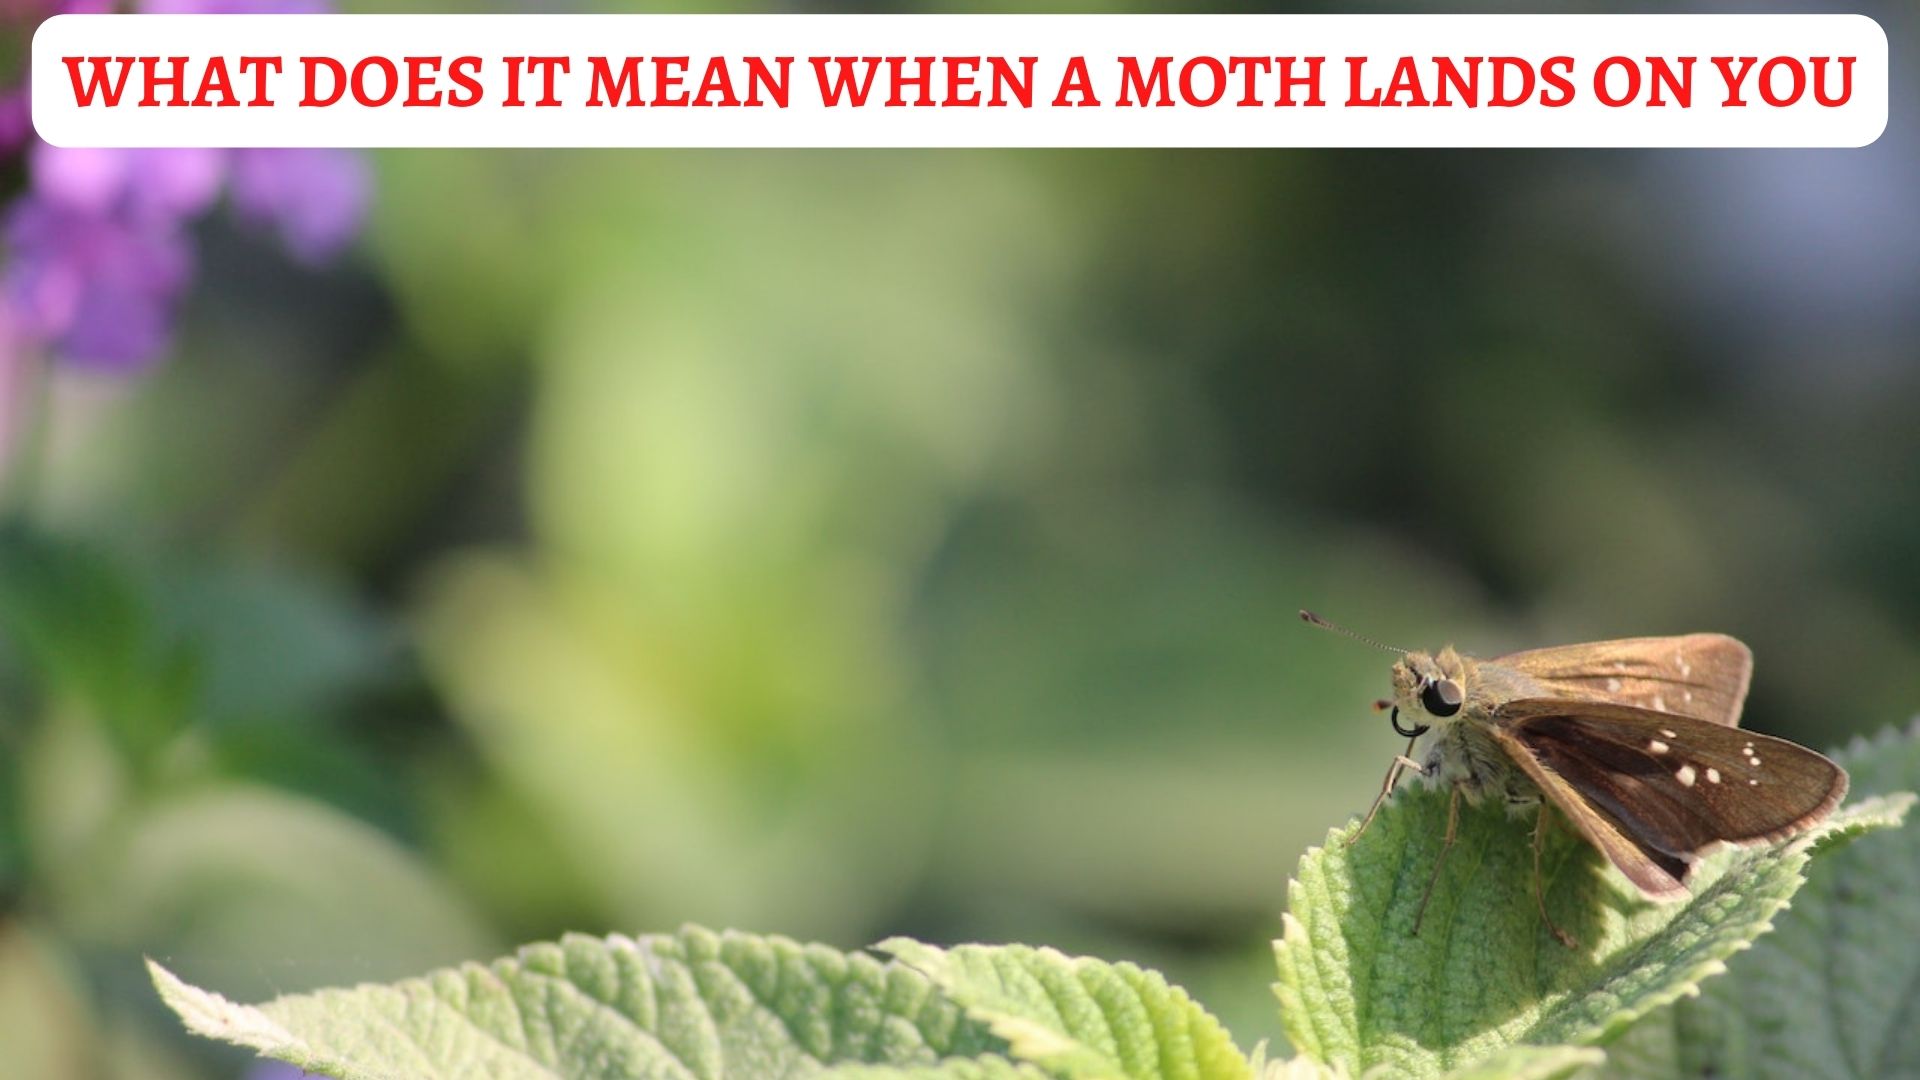 What Does It Mean When A Moth Lands On You?